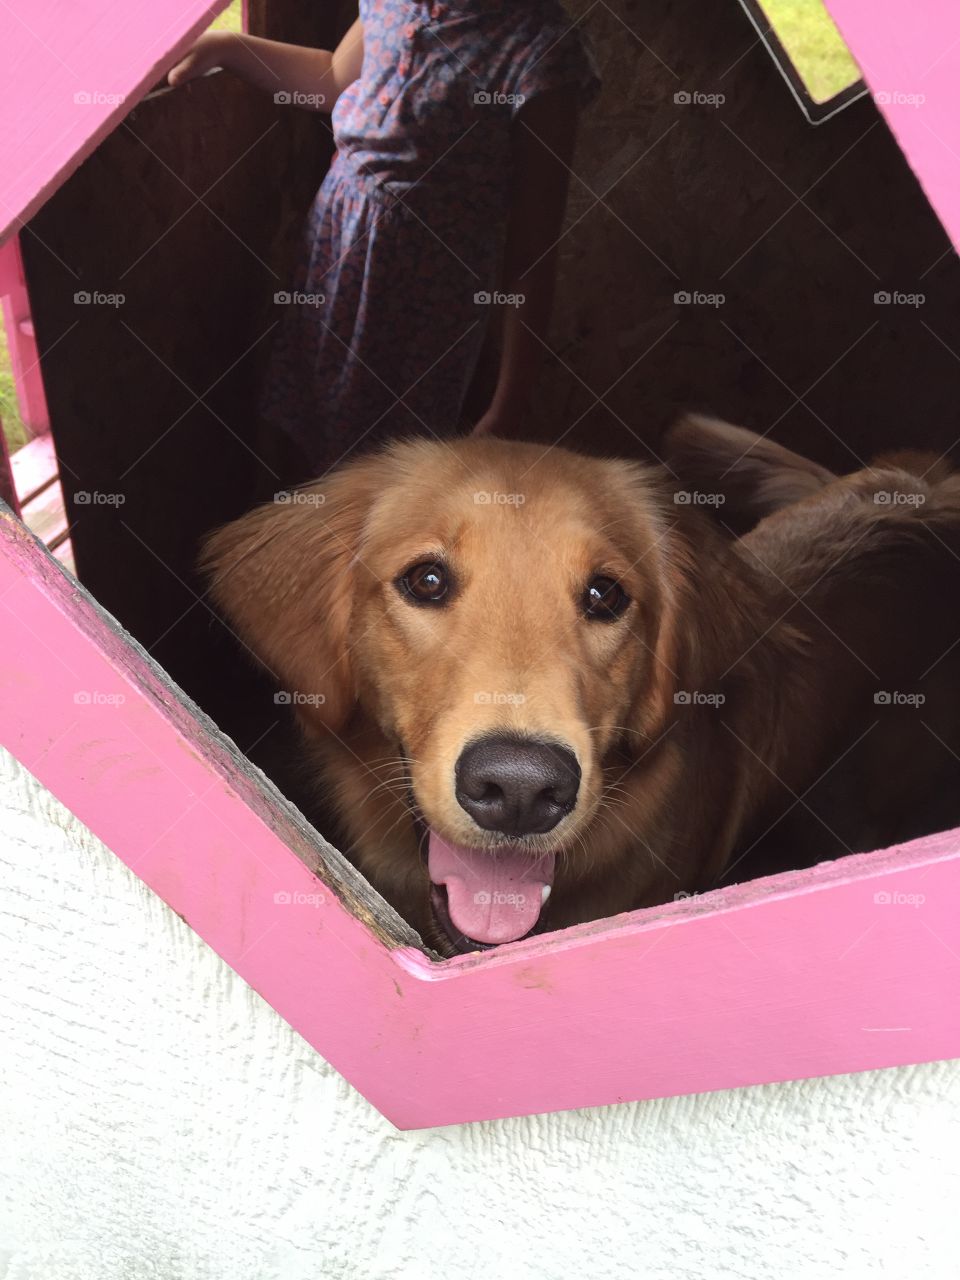 My kids were playing at the park with the dog. They decided she needed to be inside this little house and was very happy to be with the kids!